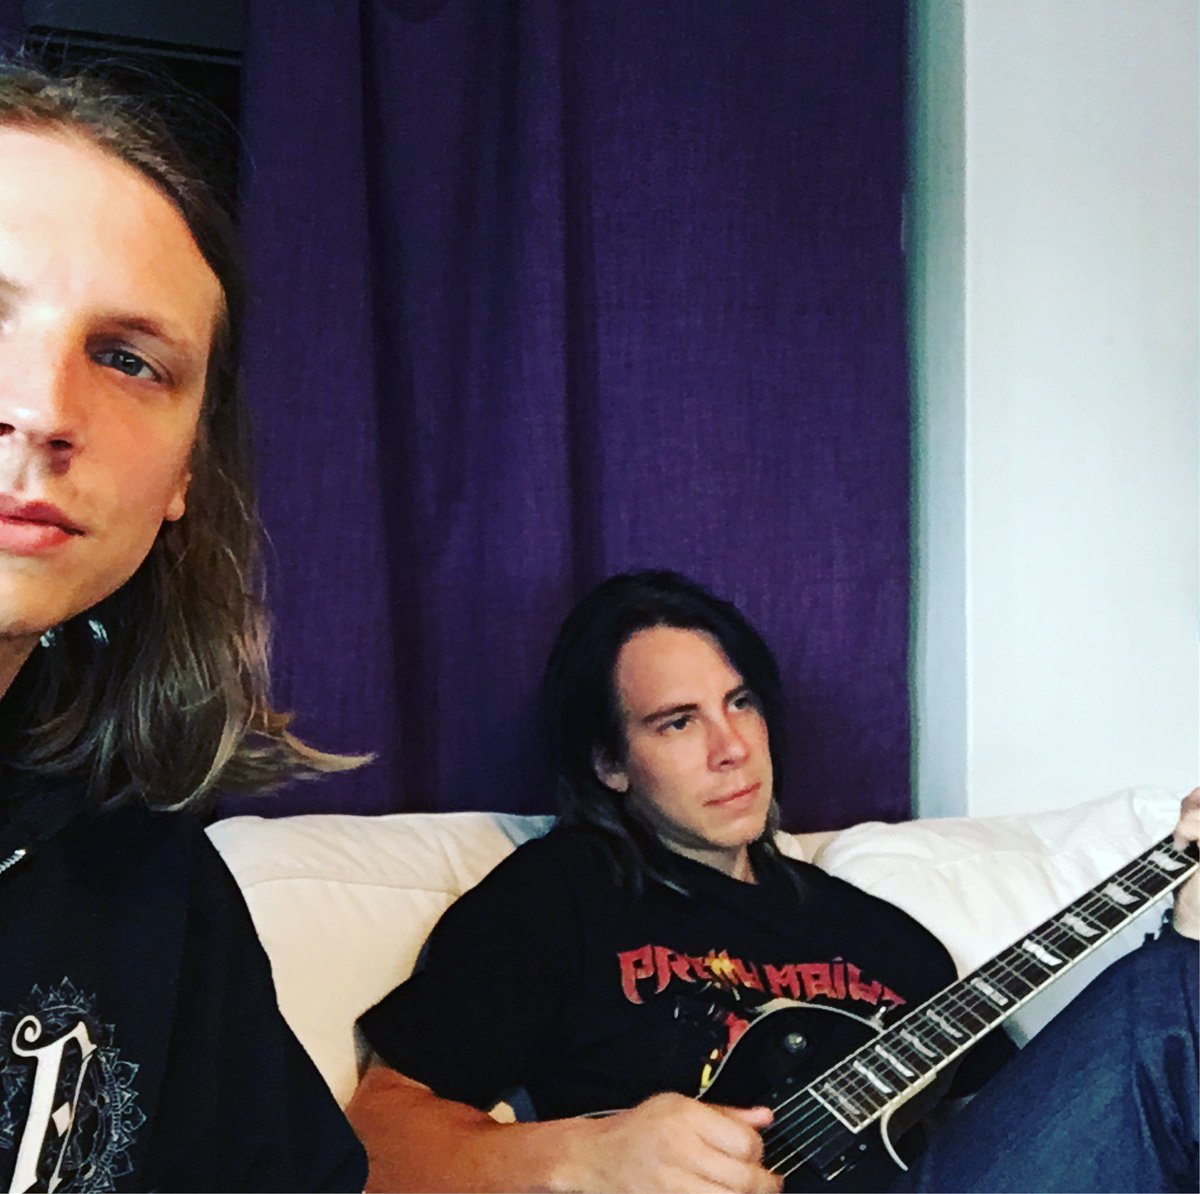 New VLOG Episode On Friday 15:00 SE time. In this video we'll cover pre-production and demoing of guitars! We did not release a VLOG last friday because we released habits :) If you havent yet listen here: bit.ly/FIRSTBORNHABITS This pic is from summer 2017 when we did pre-prod